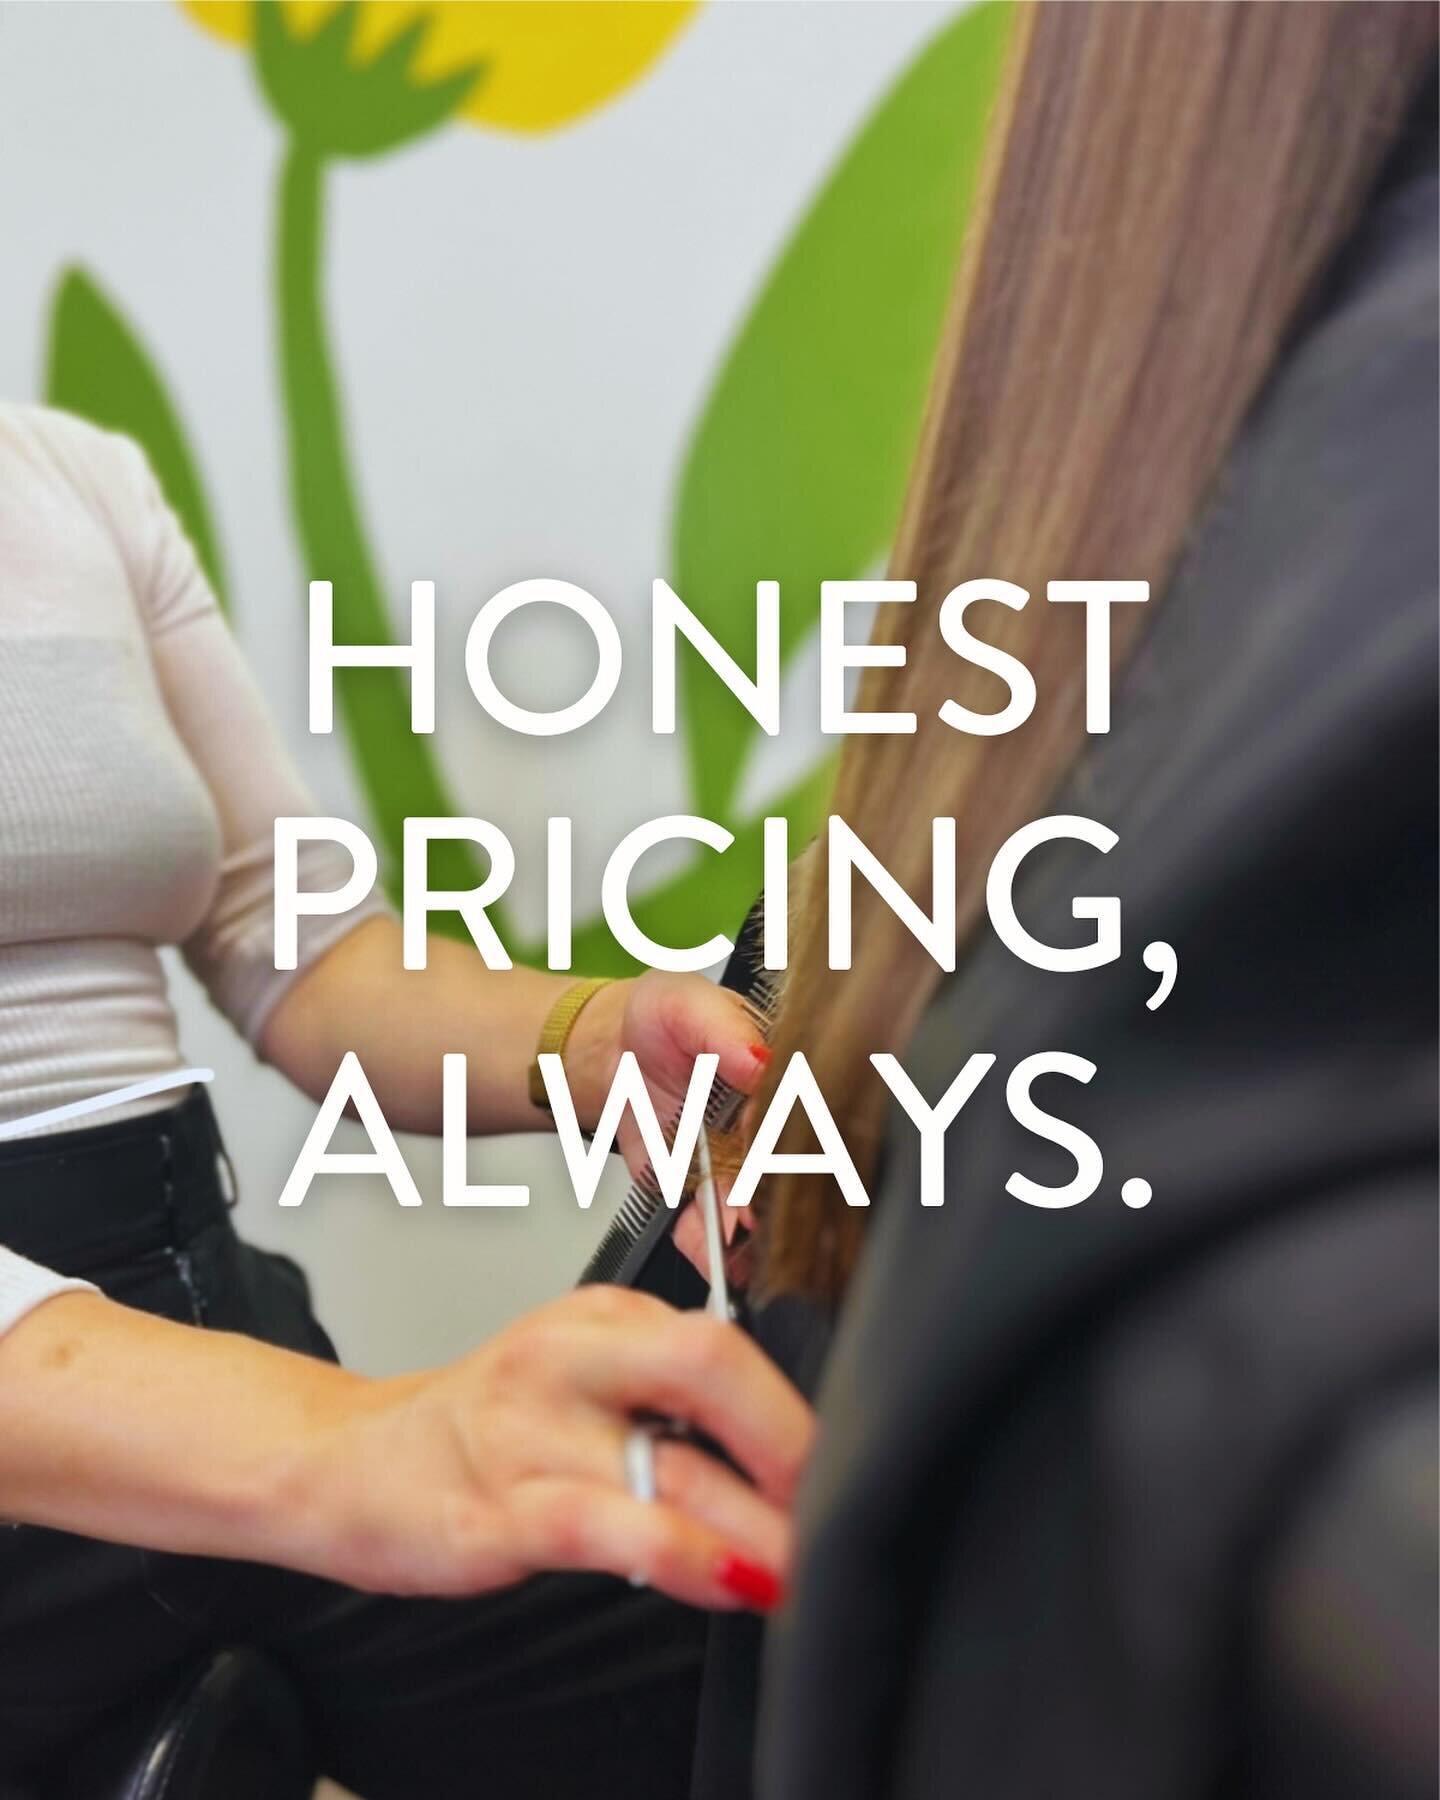 Tired of seeing service pricing online and then leaving the salon having spent far more than you&rsquo;d bargained (and budgeted) for?

We hear this story all of the time and understand how frustrating it can be to be told you need costly treatments 